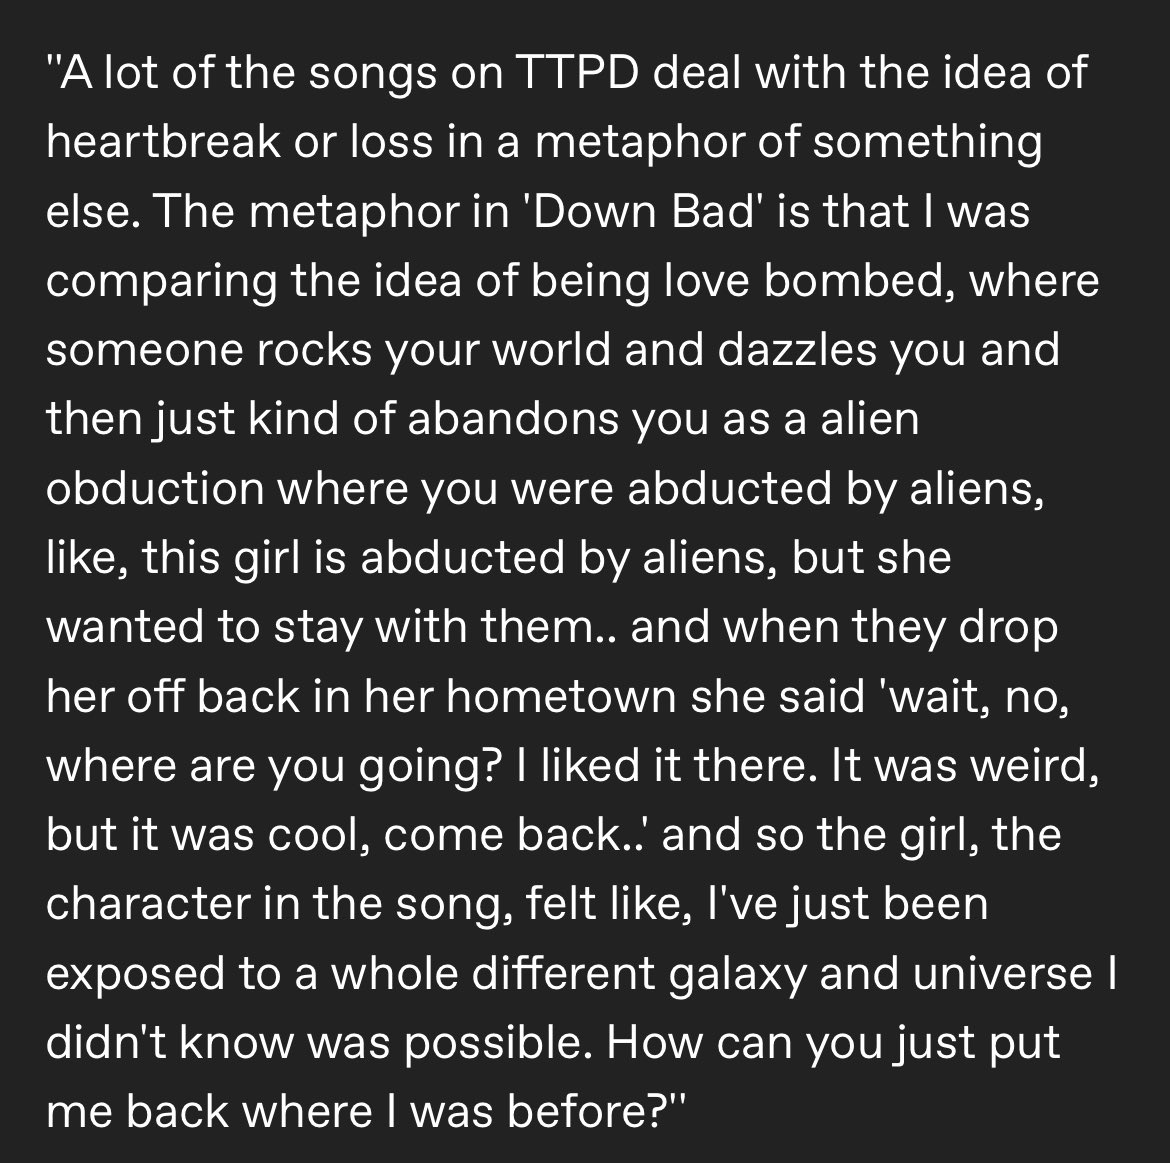 💬 | Taylor Swift on ‘Down Bad’ for @iHeartRadio “The metaphor is that I was comparing the idea of being love bombed, where someone rocks your world and dazzles you, and then just kind of abandons you… this girl is abducted by aliens, but she wanted to stay with them…”